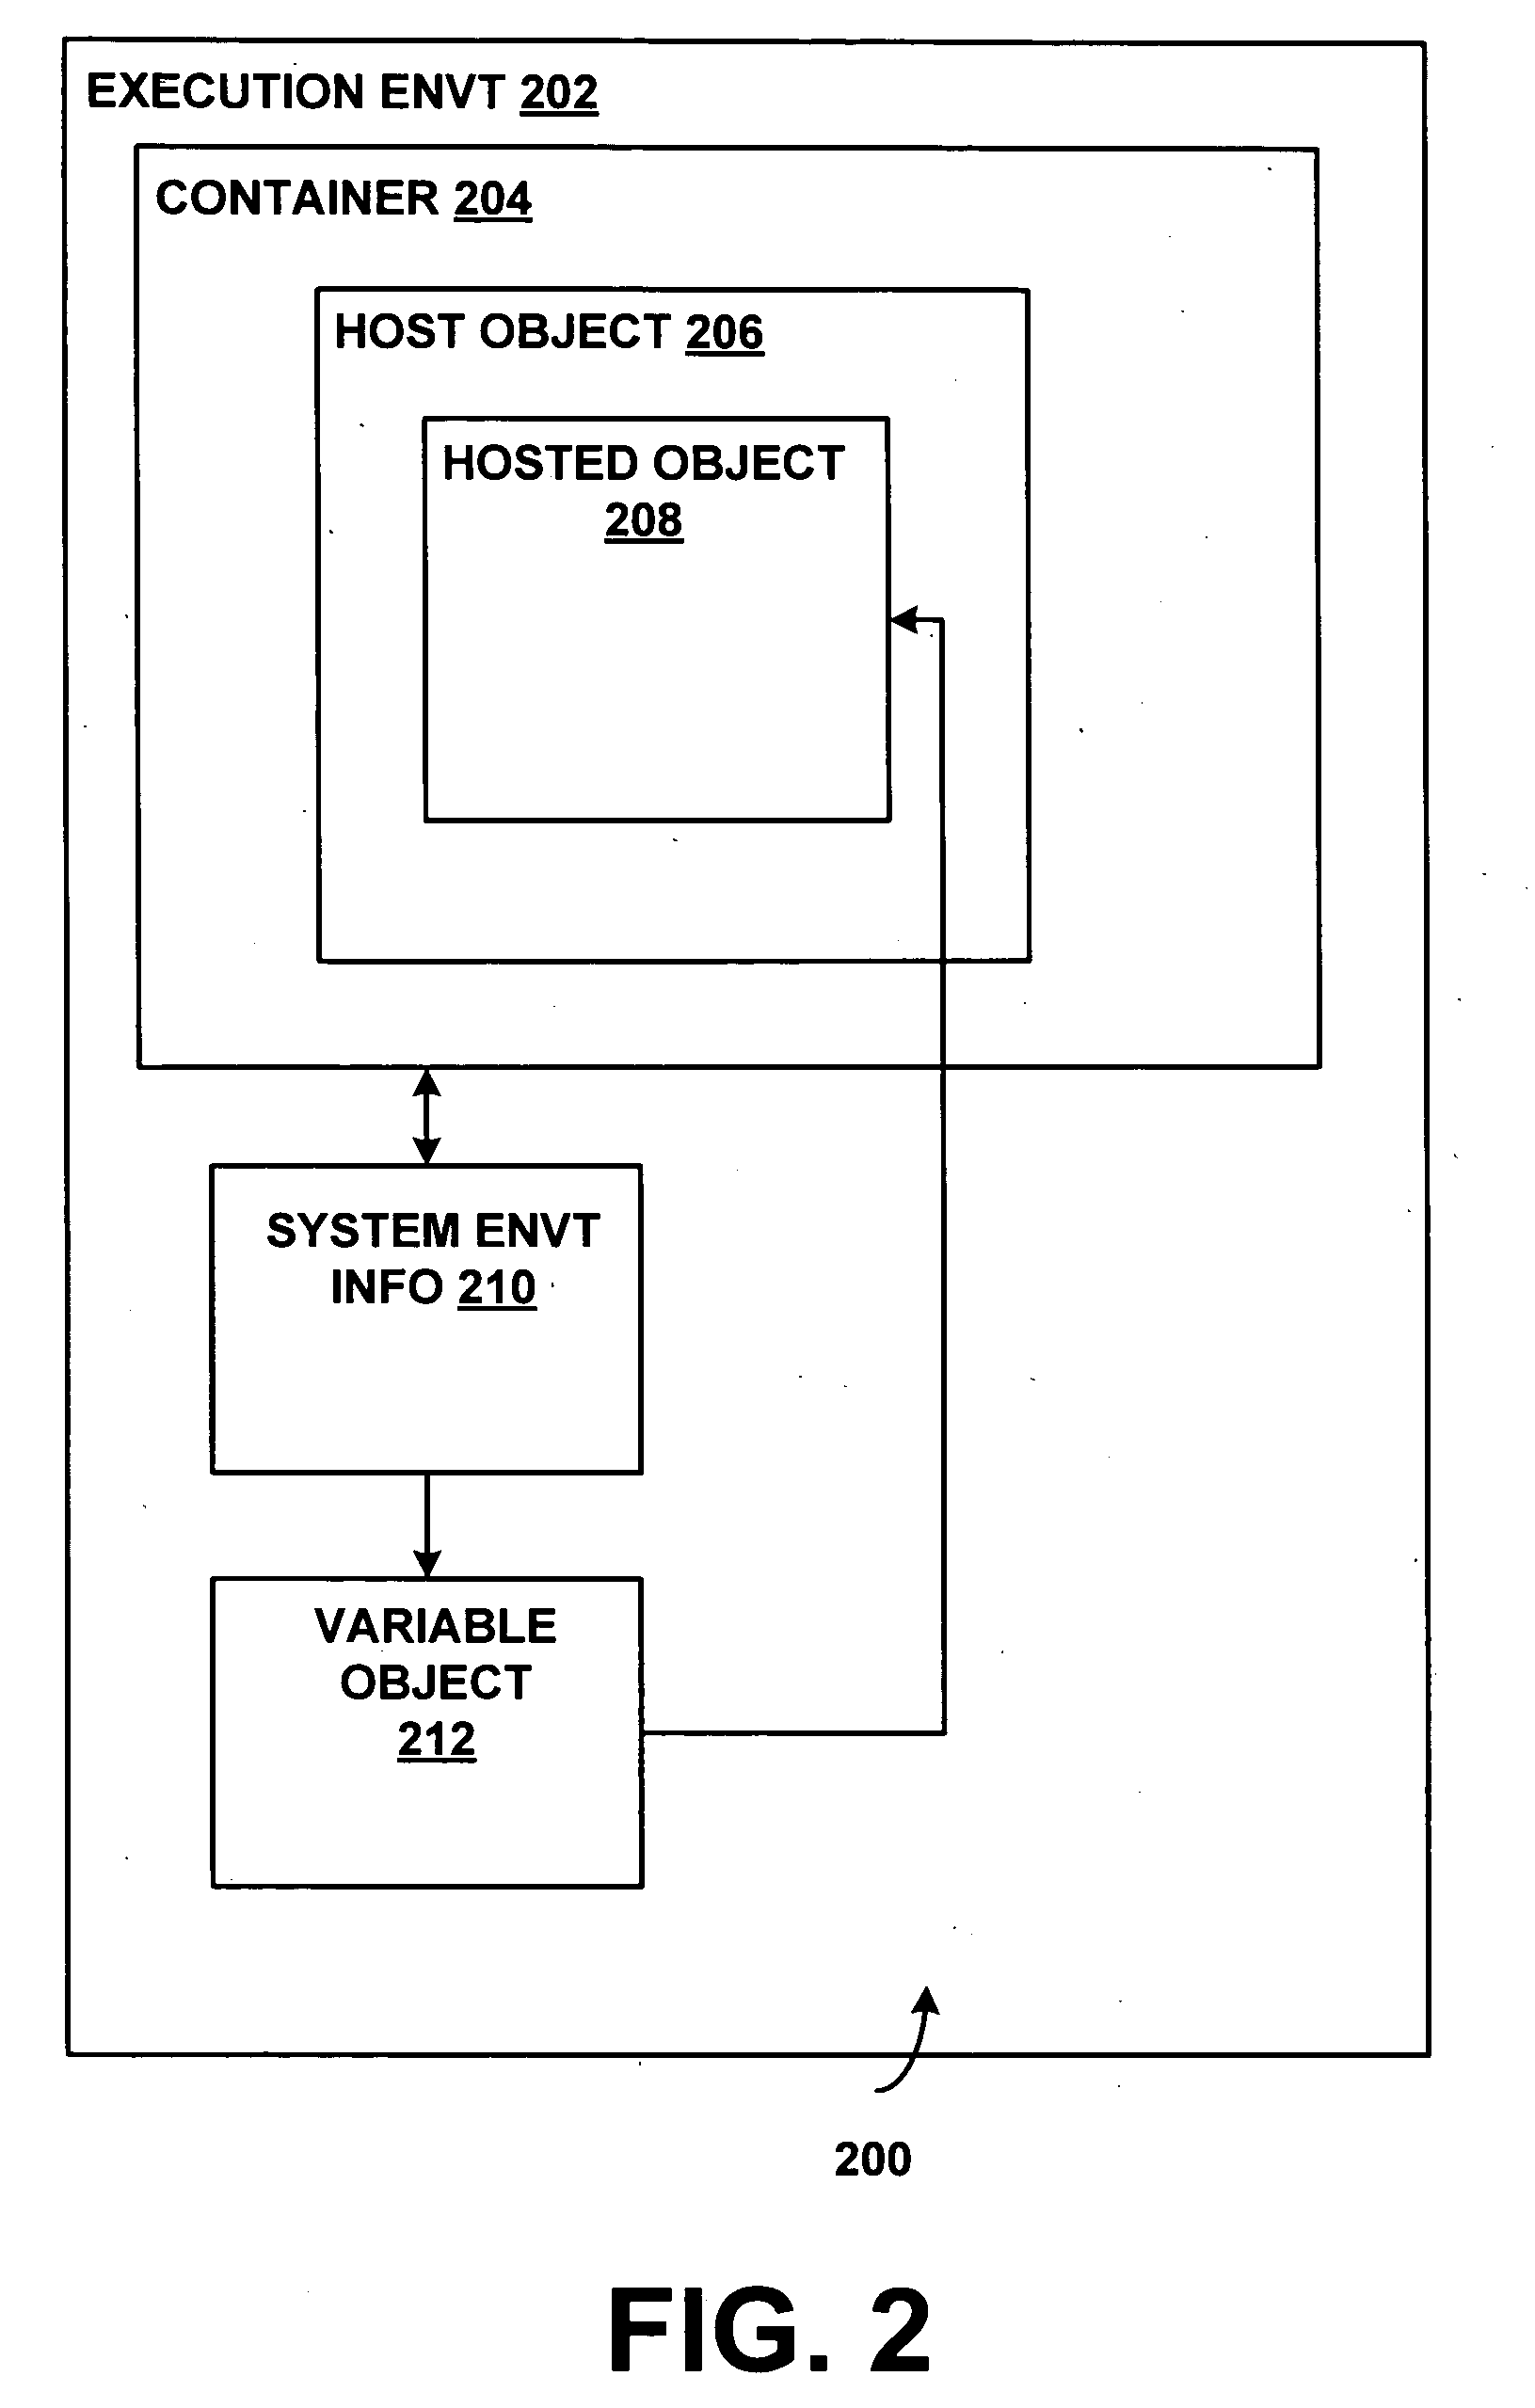 Providing information to an isolated hosted object via system-created variable objects